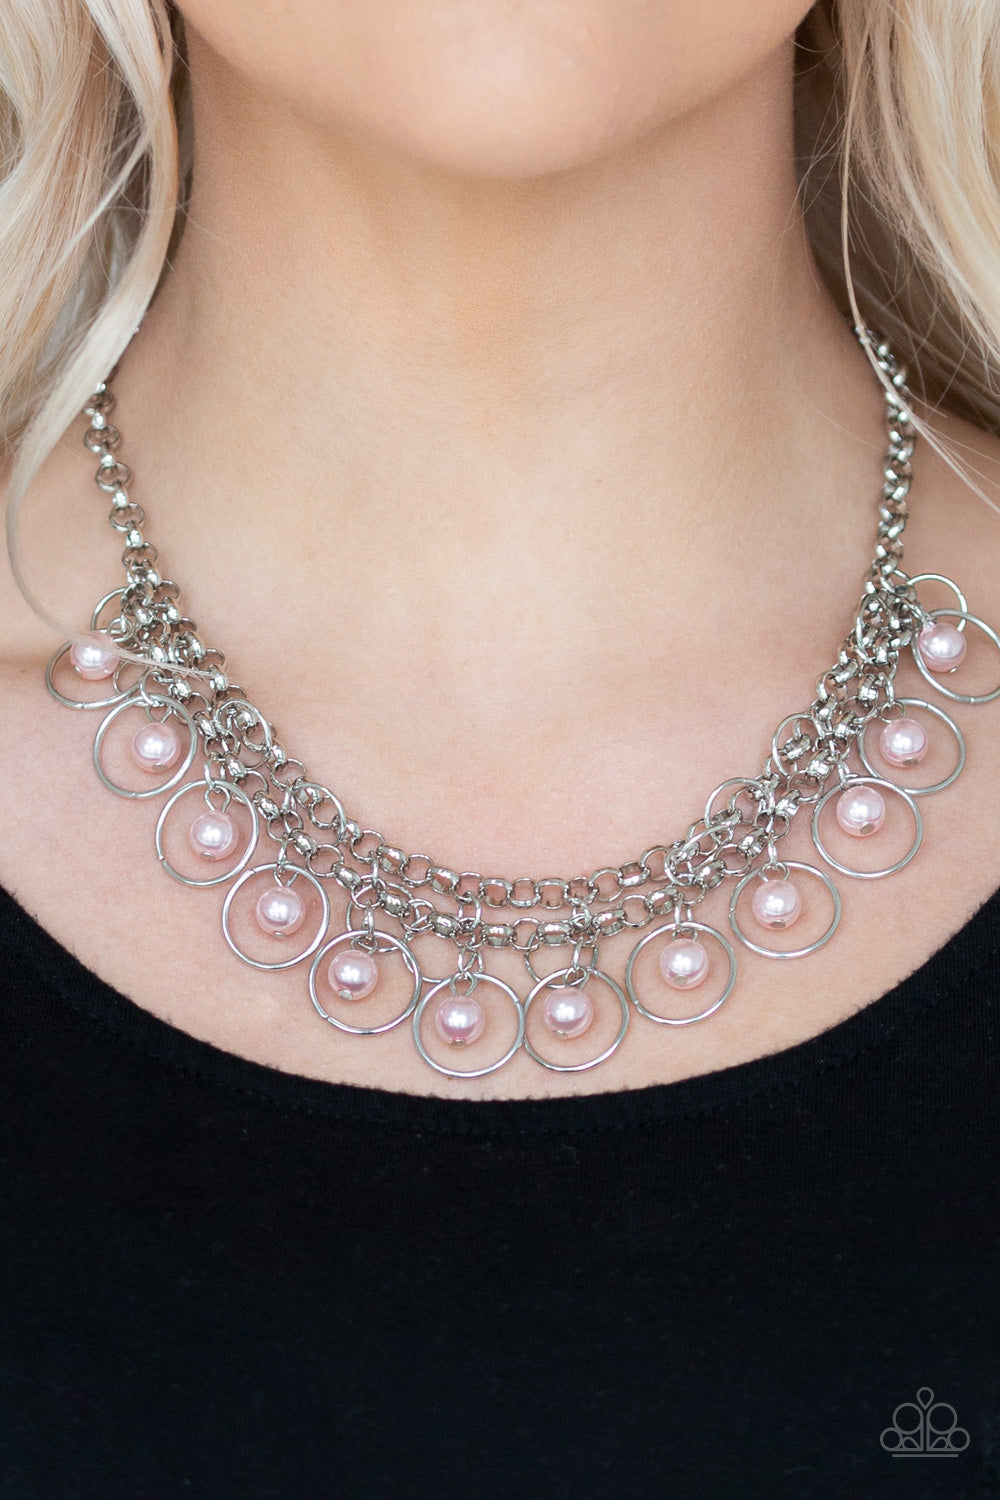 Paparazzi Its About SHOWTIME! - Pink Pearl Necklace #Paparazzi  #fivedollarbling #daniellebaker129930 #paparazziacce… | Pink necklace, Pink  pearl necklace, Necklace